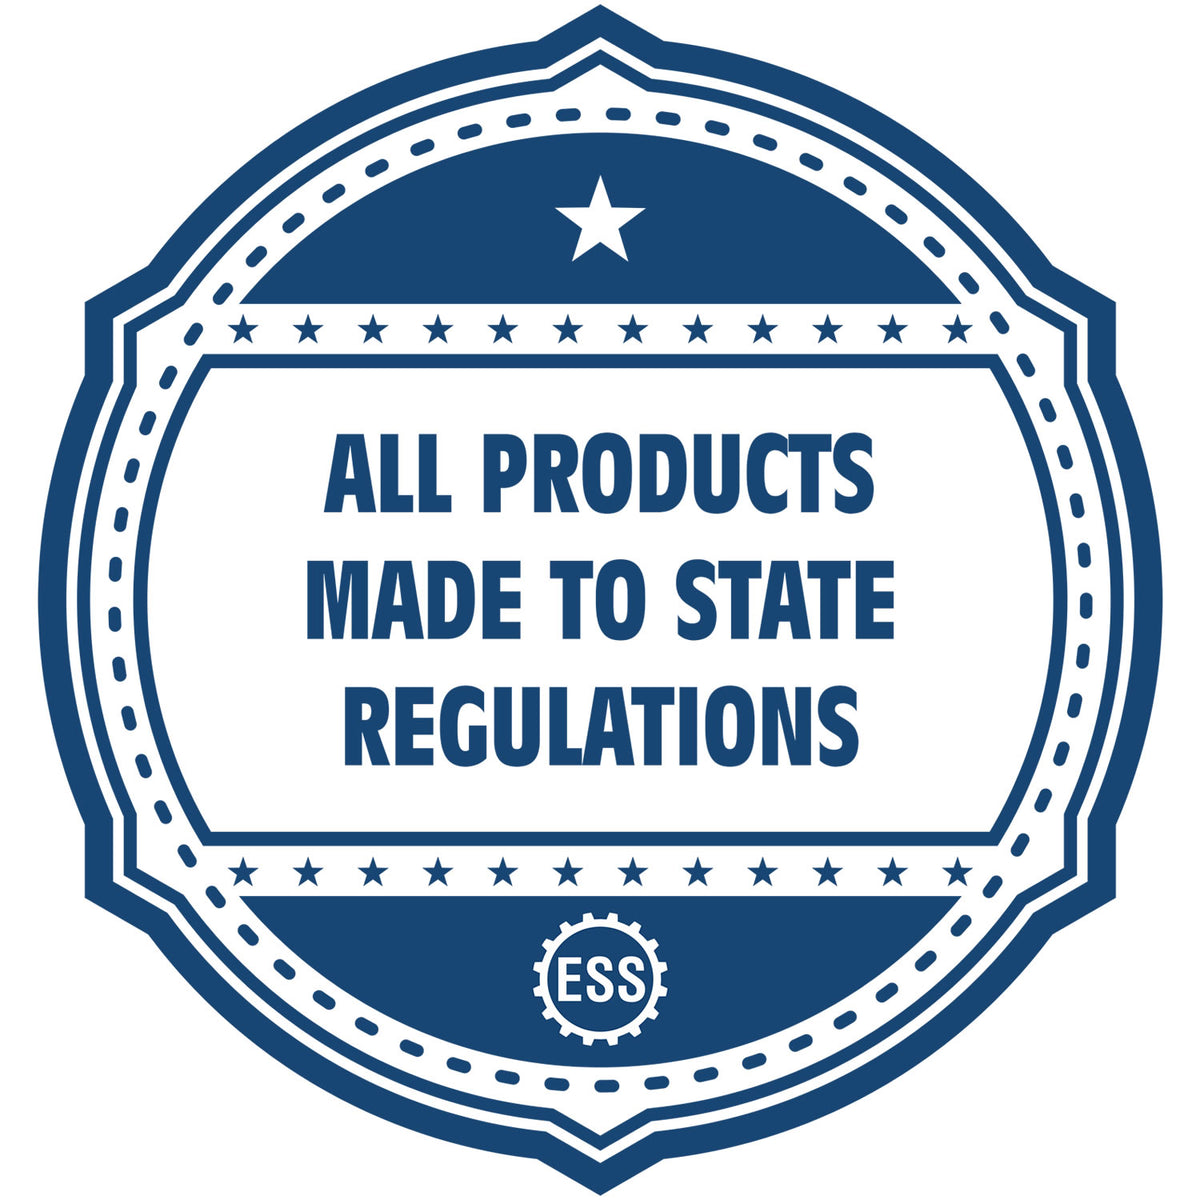 An icon or badge element for the Kansas Desk Surveyor Seal Embosser showing that this product is made in compliance with state regulations.